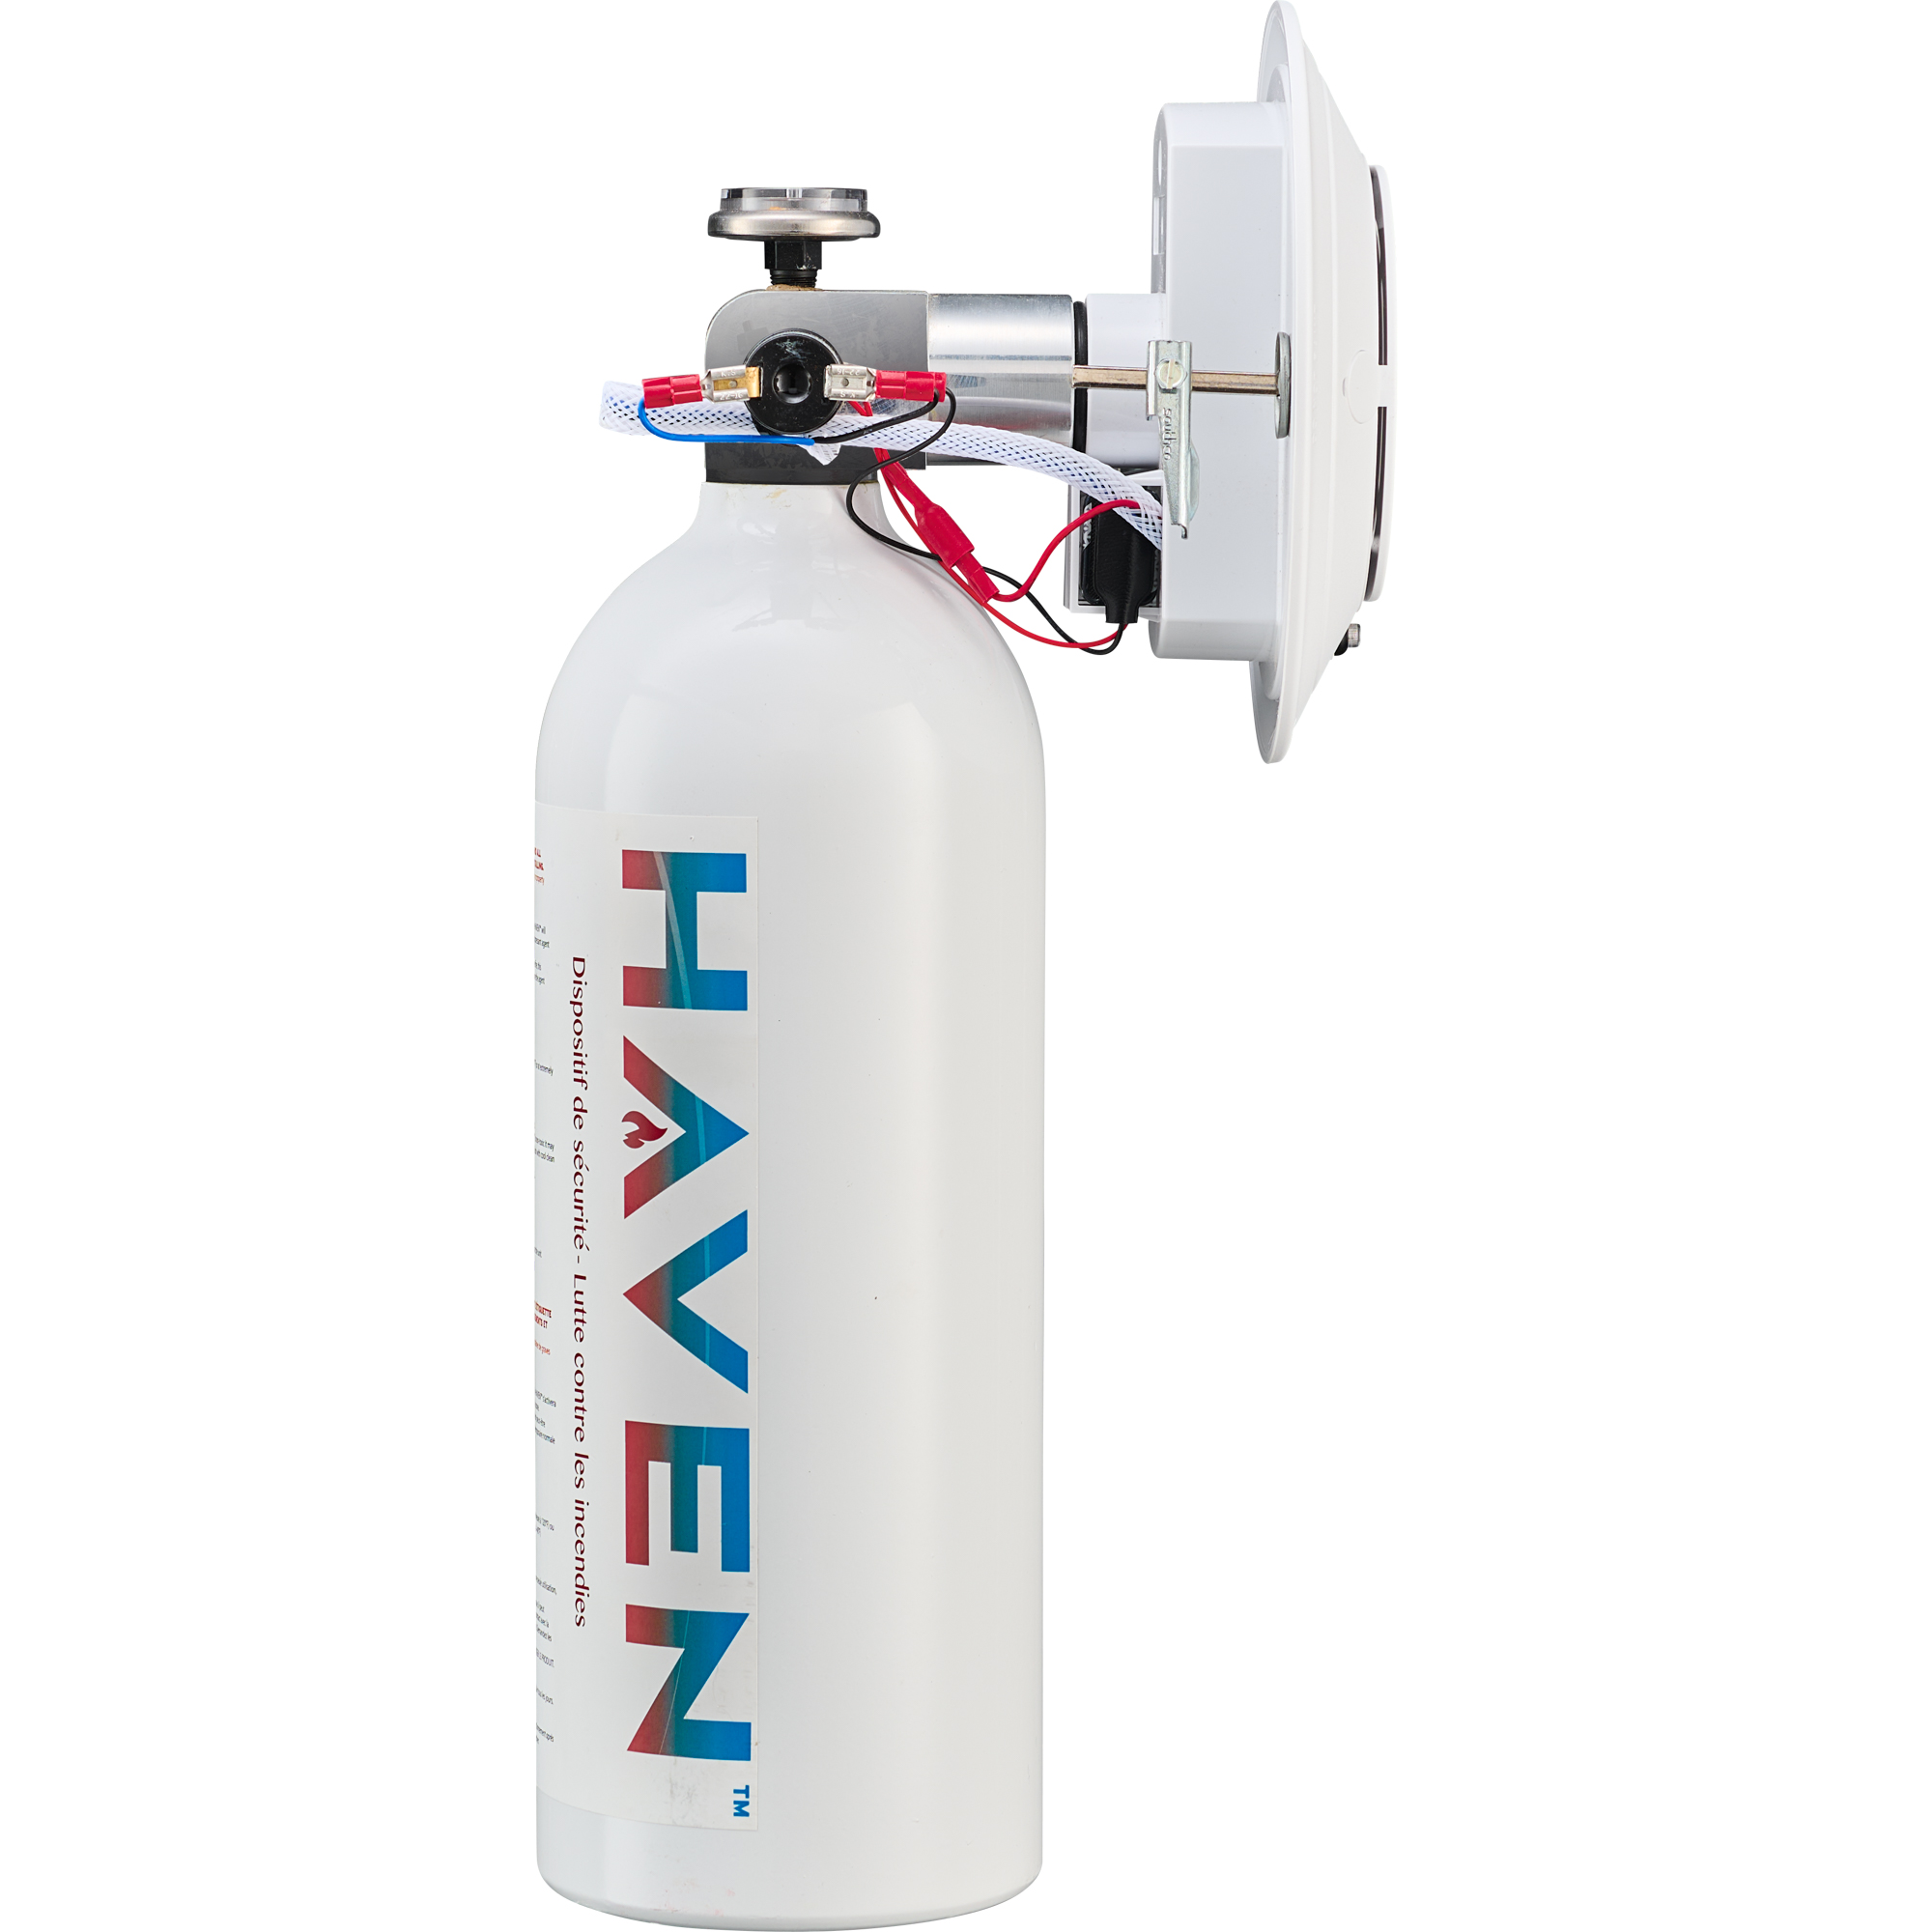 HAVEN Fire Suppression Safety Device 155F - 68C Rated (PREORDER)